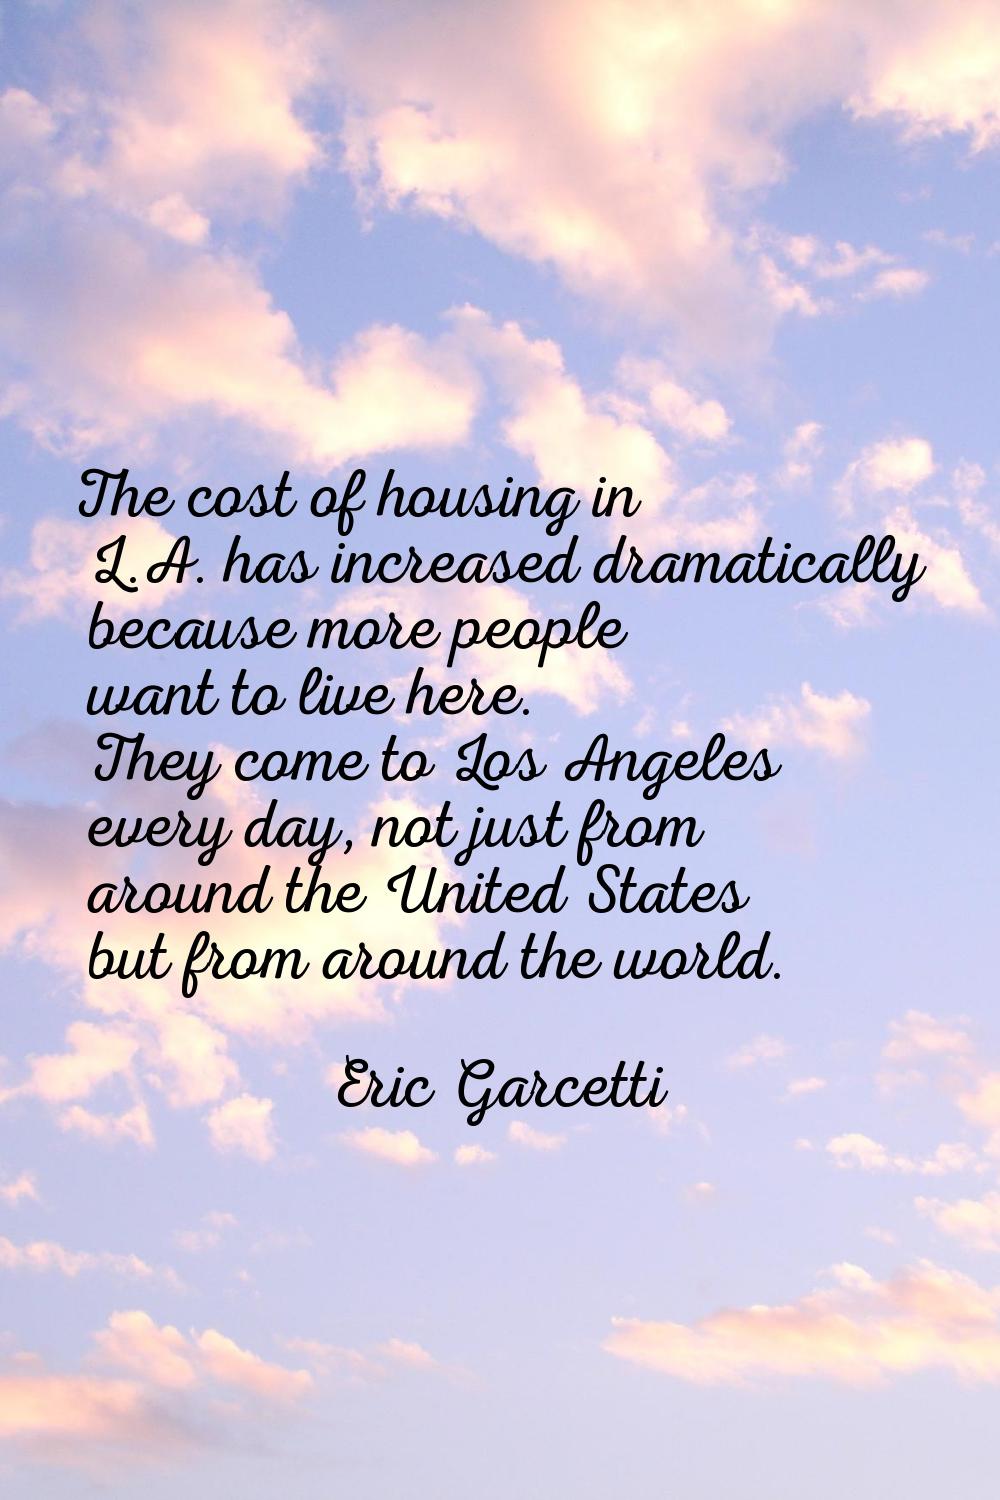 The cost of housing in L.A. has increased dramatically because more people want to live here. They 